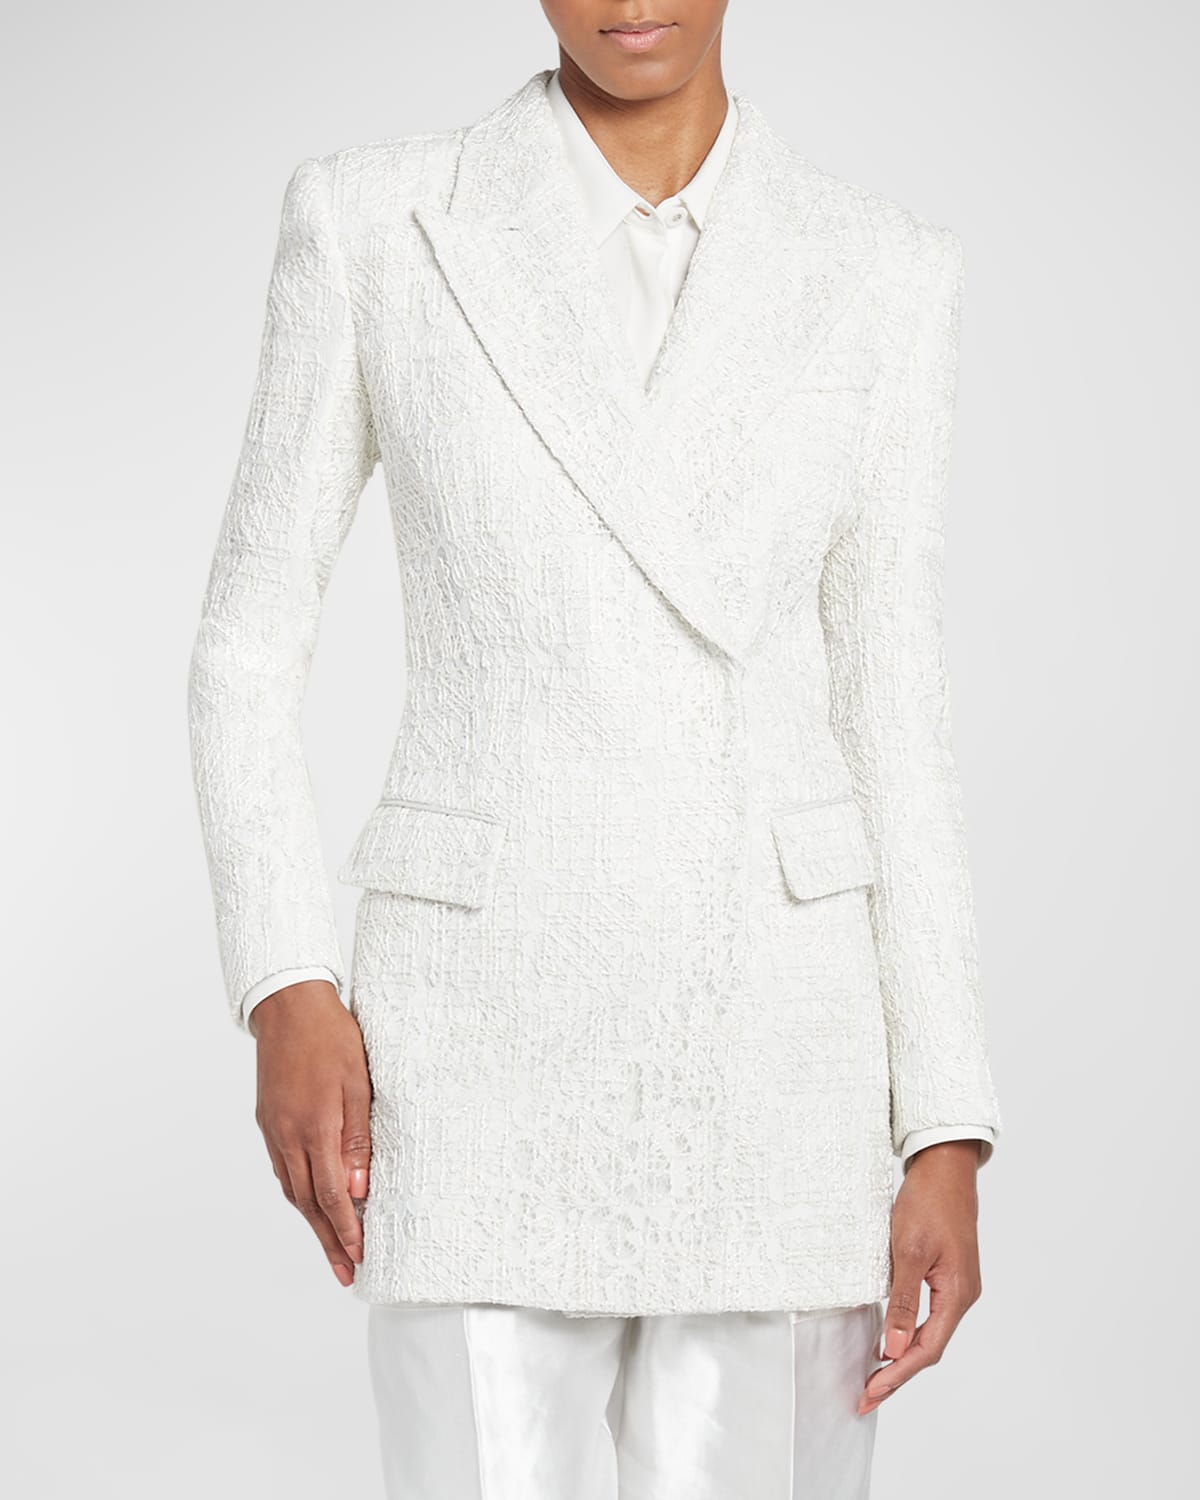 Giorgio Armani Broderie Cordonnet Lace Tailored Jacket In Solid White